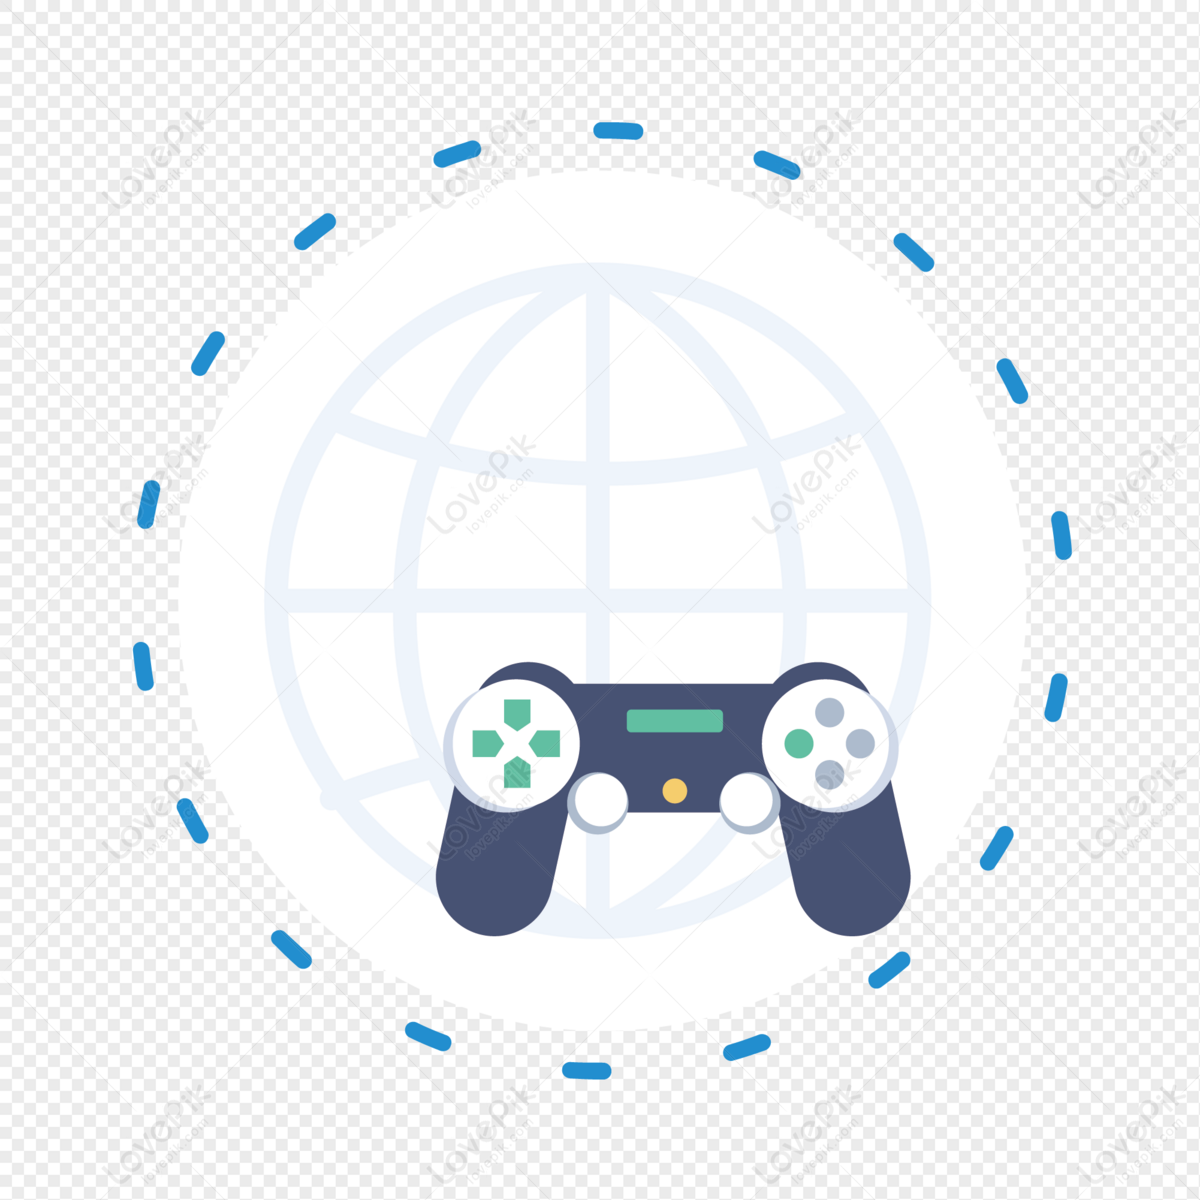 Online Gaming Vector Art, Icons, and Graphics for Free Download